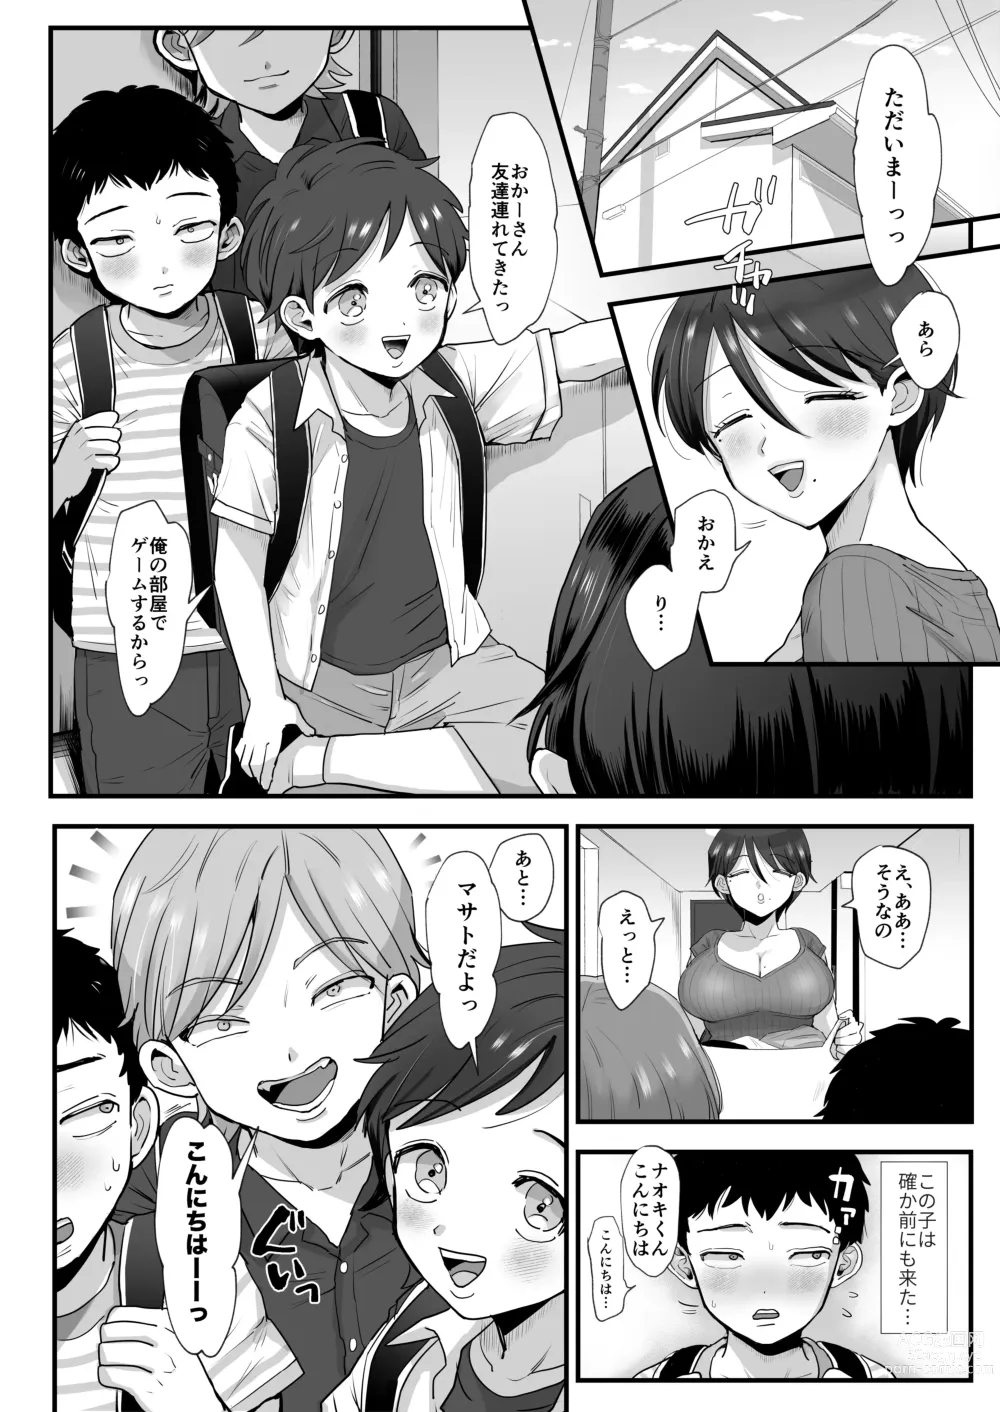 Page 6 of doujinshi Gentle, Busty, Narrow Eyed Momma.